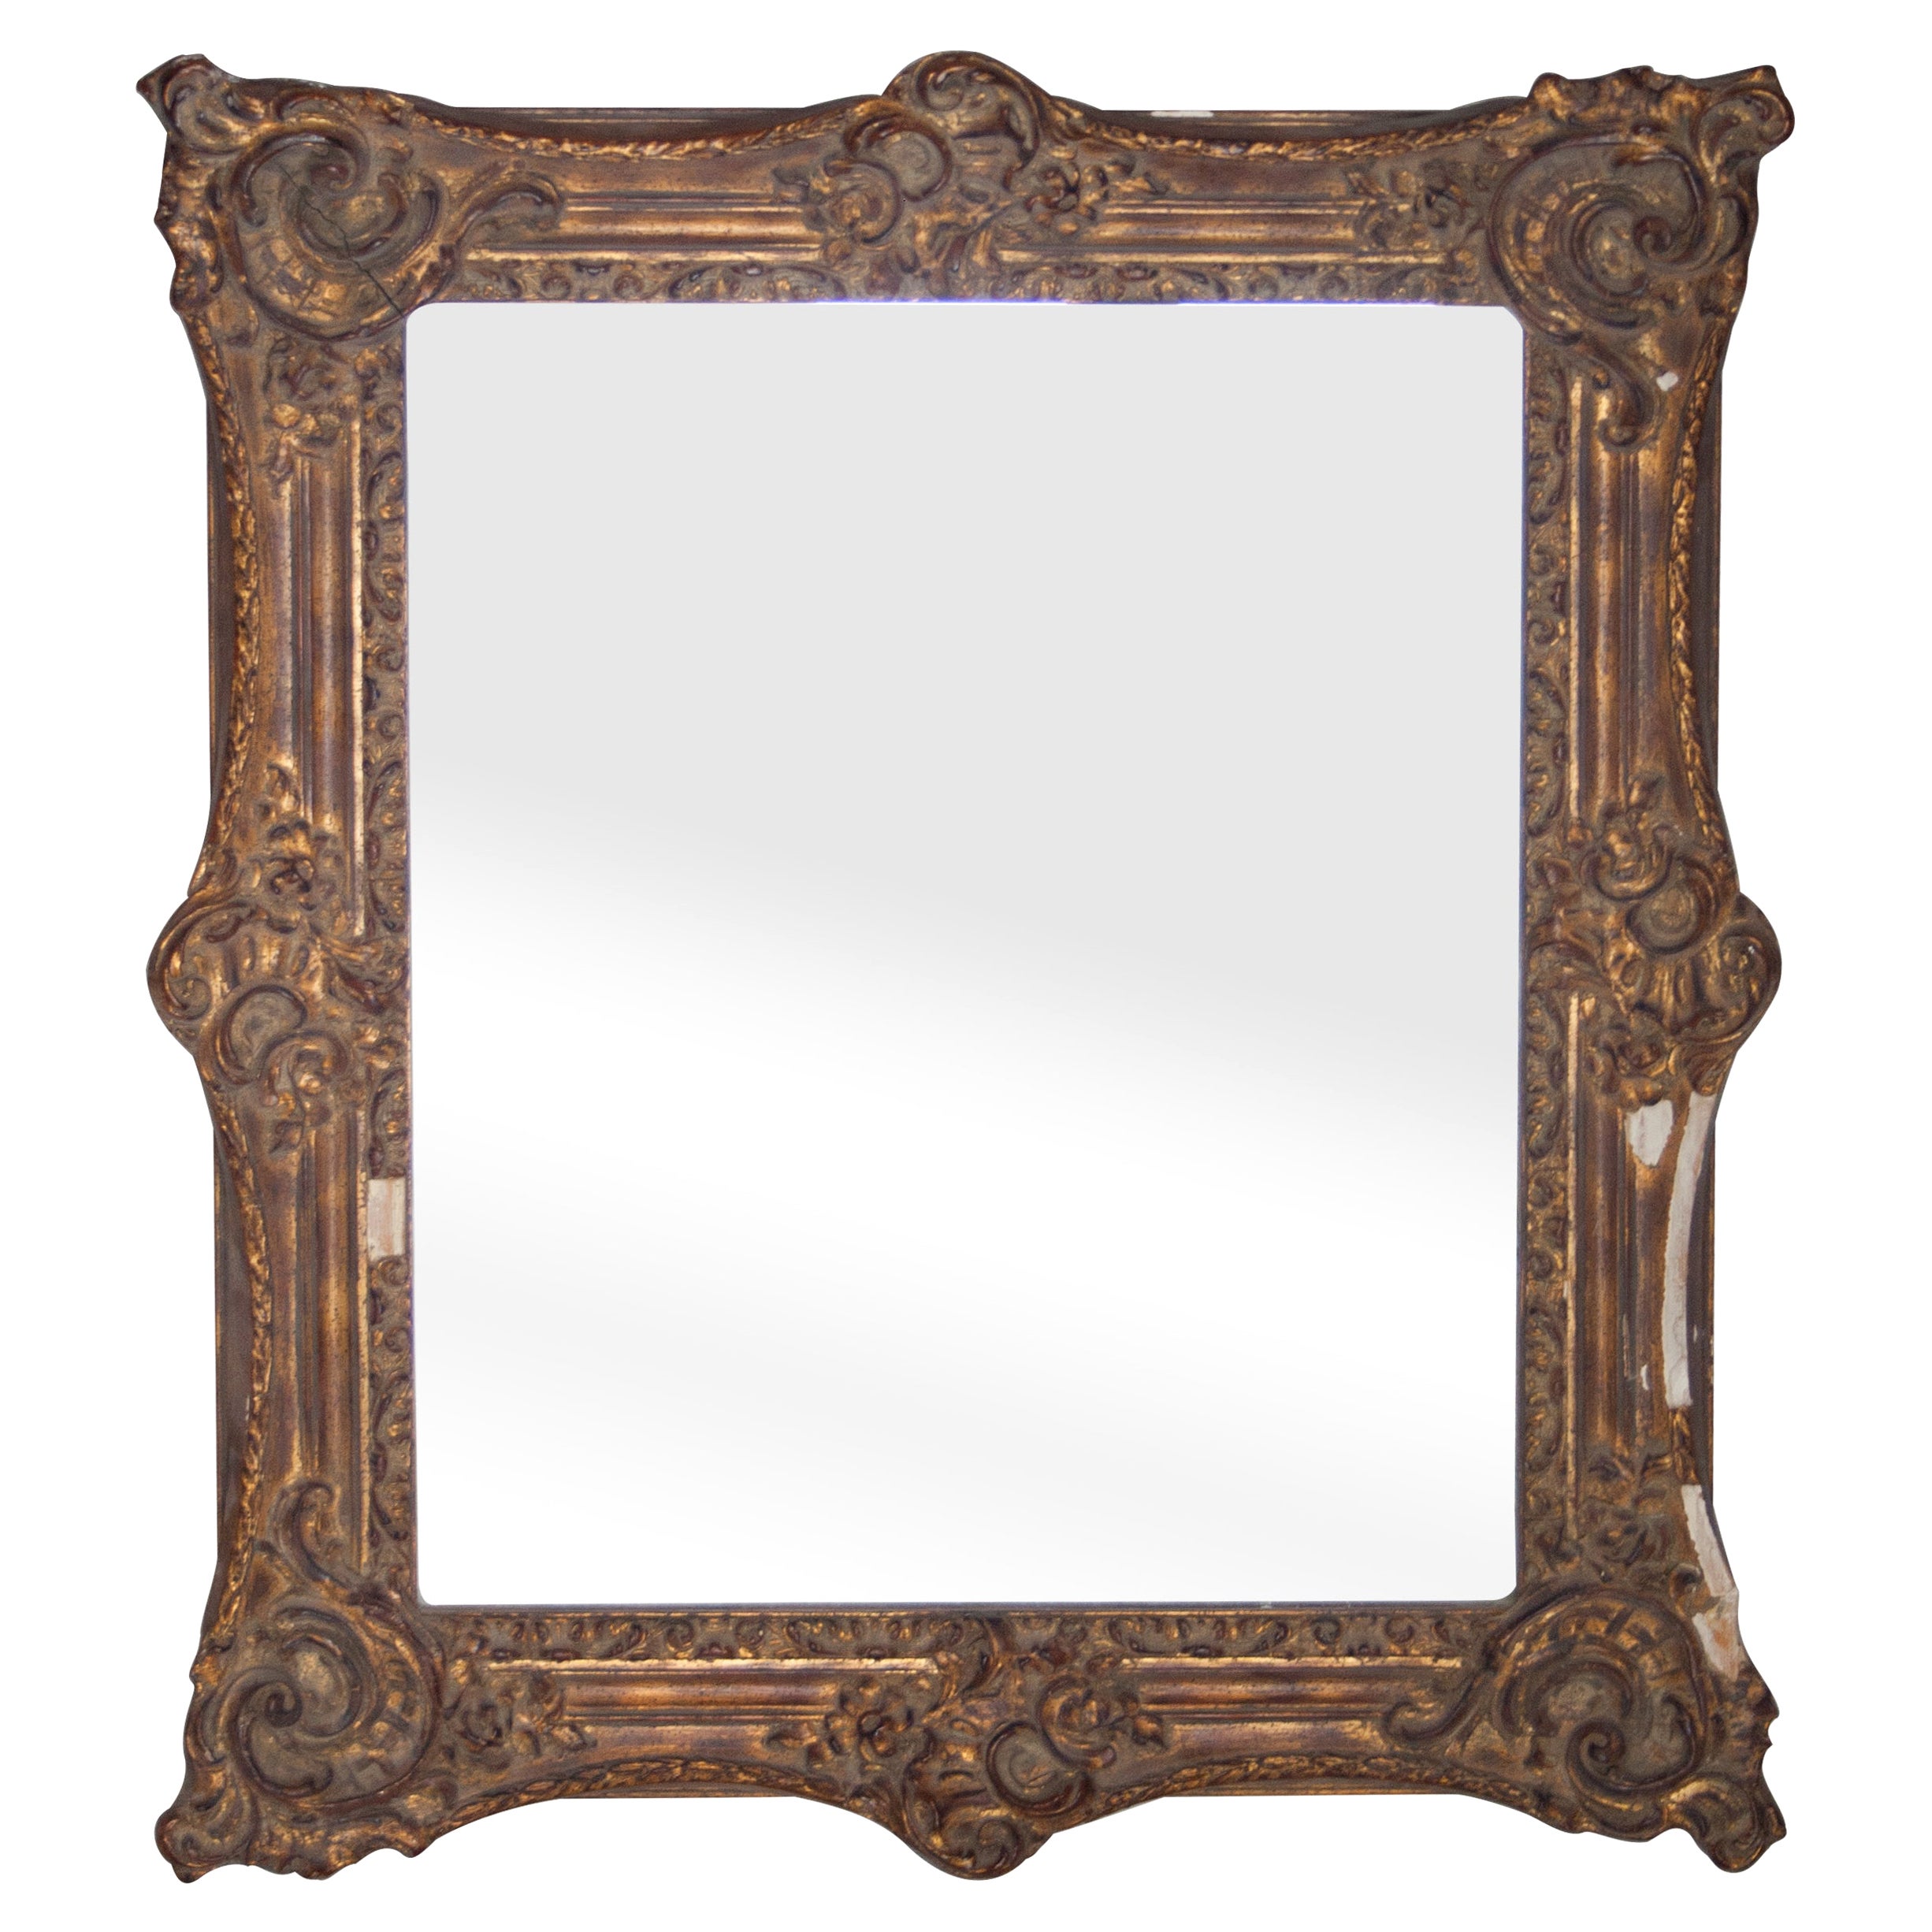 Neoclassical Empire Rectangular Gold Hand Carved Wooden Mirror, Spain, 1970